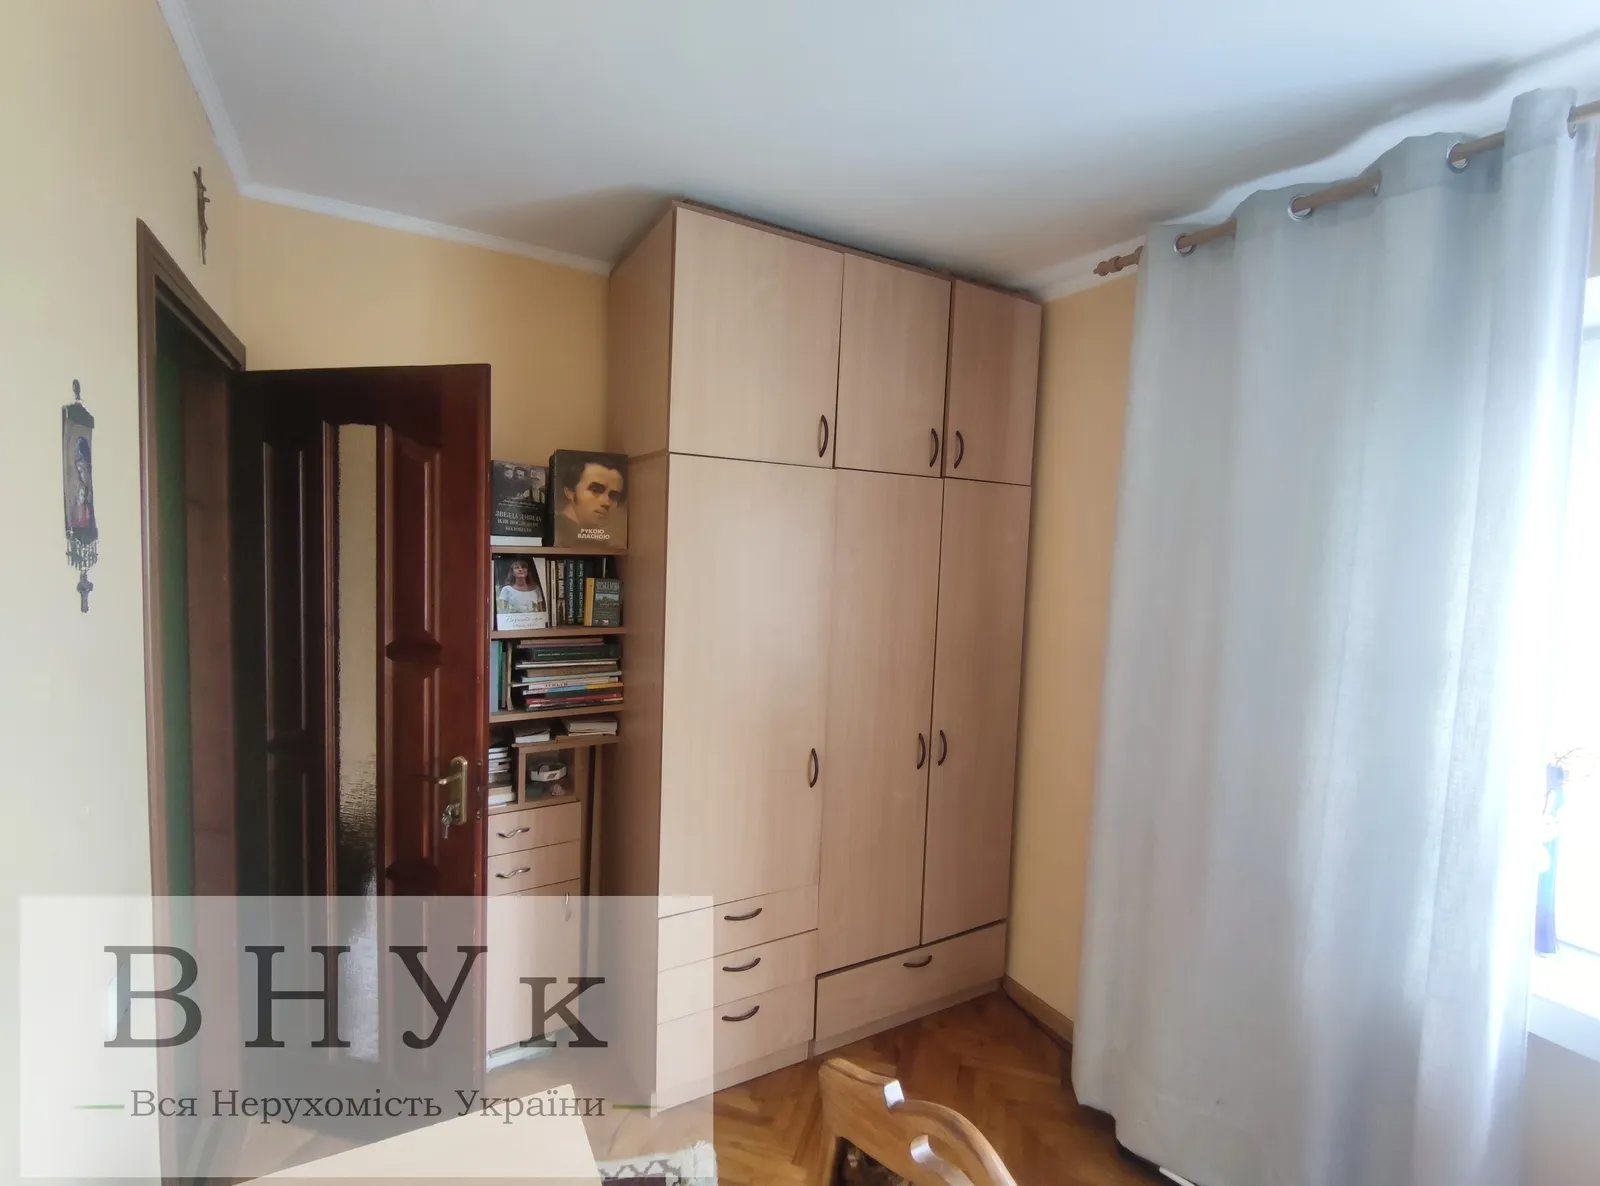 Apartments for sale. 2 rooms, 41 m², 3rd floor/5 floors. Druzhby vul., Ternopil. 